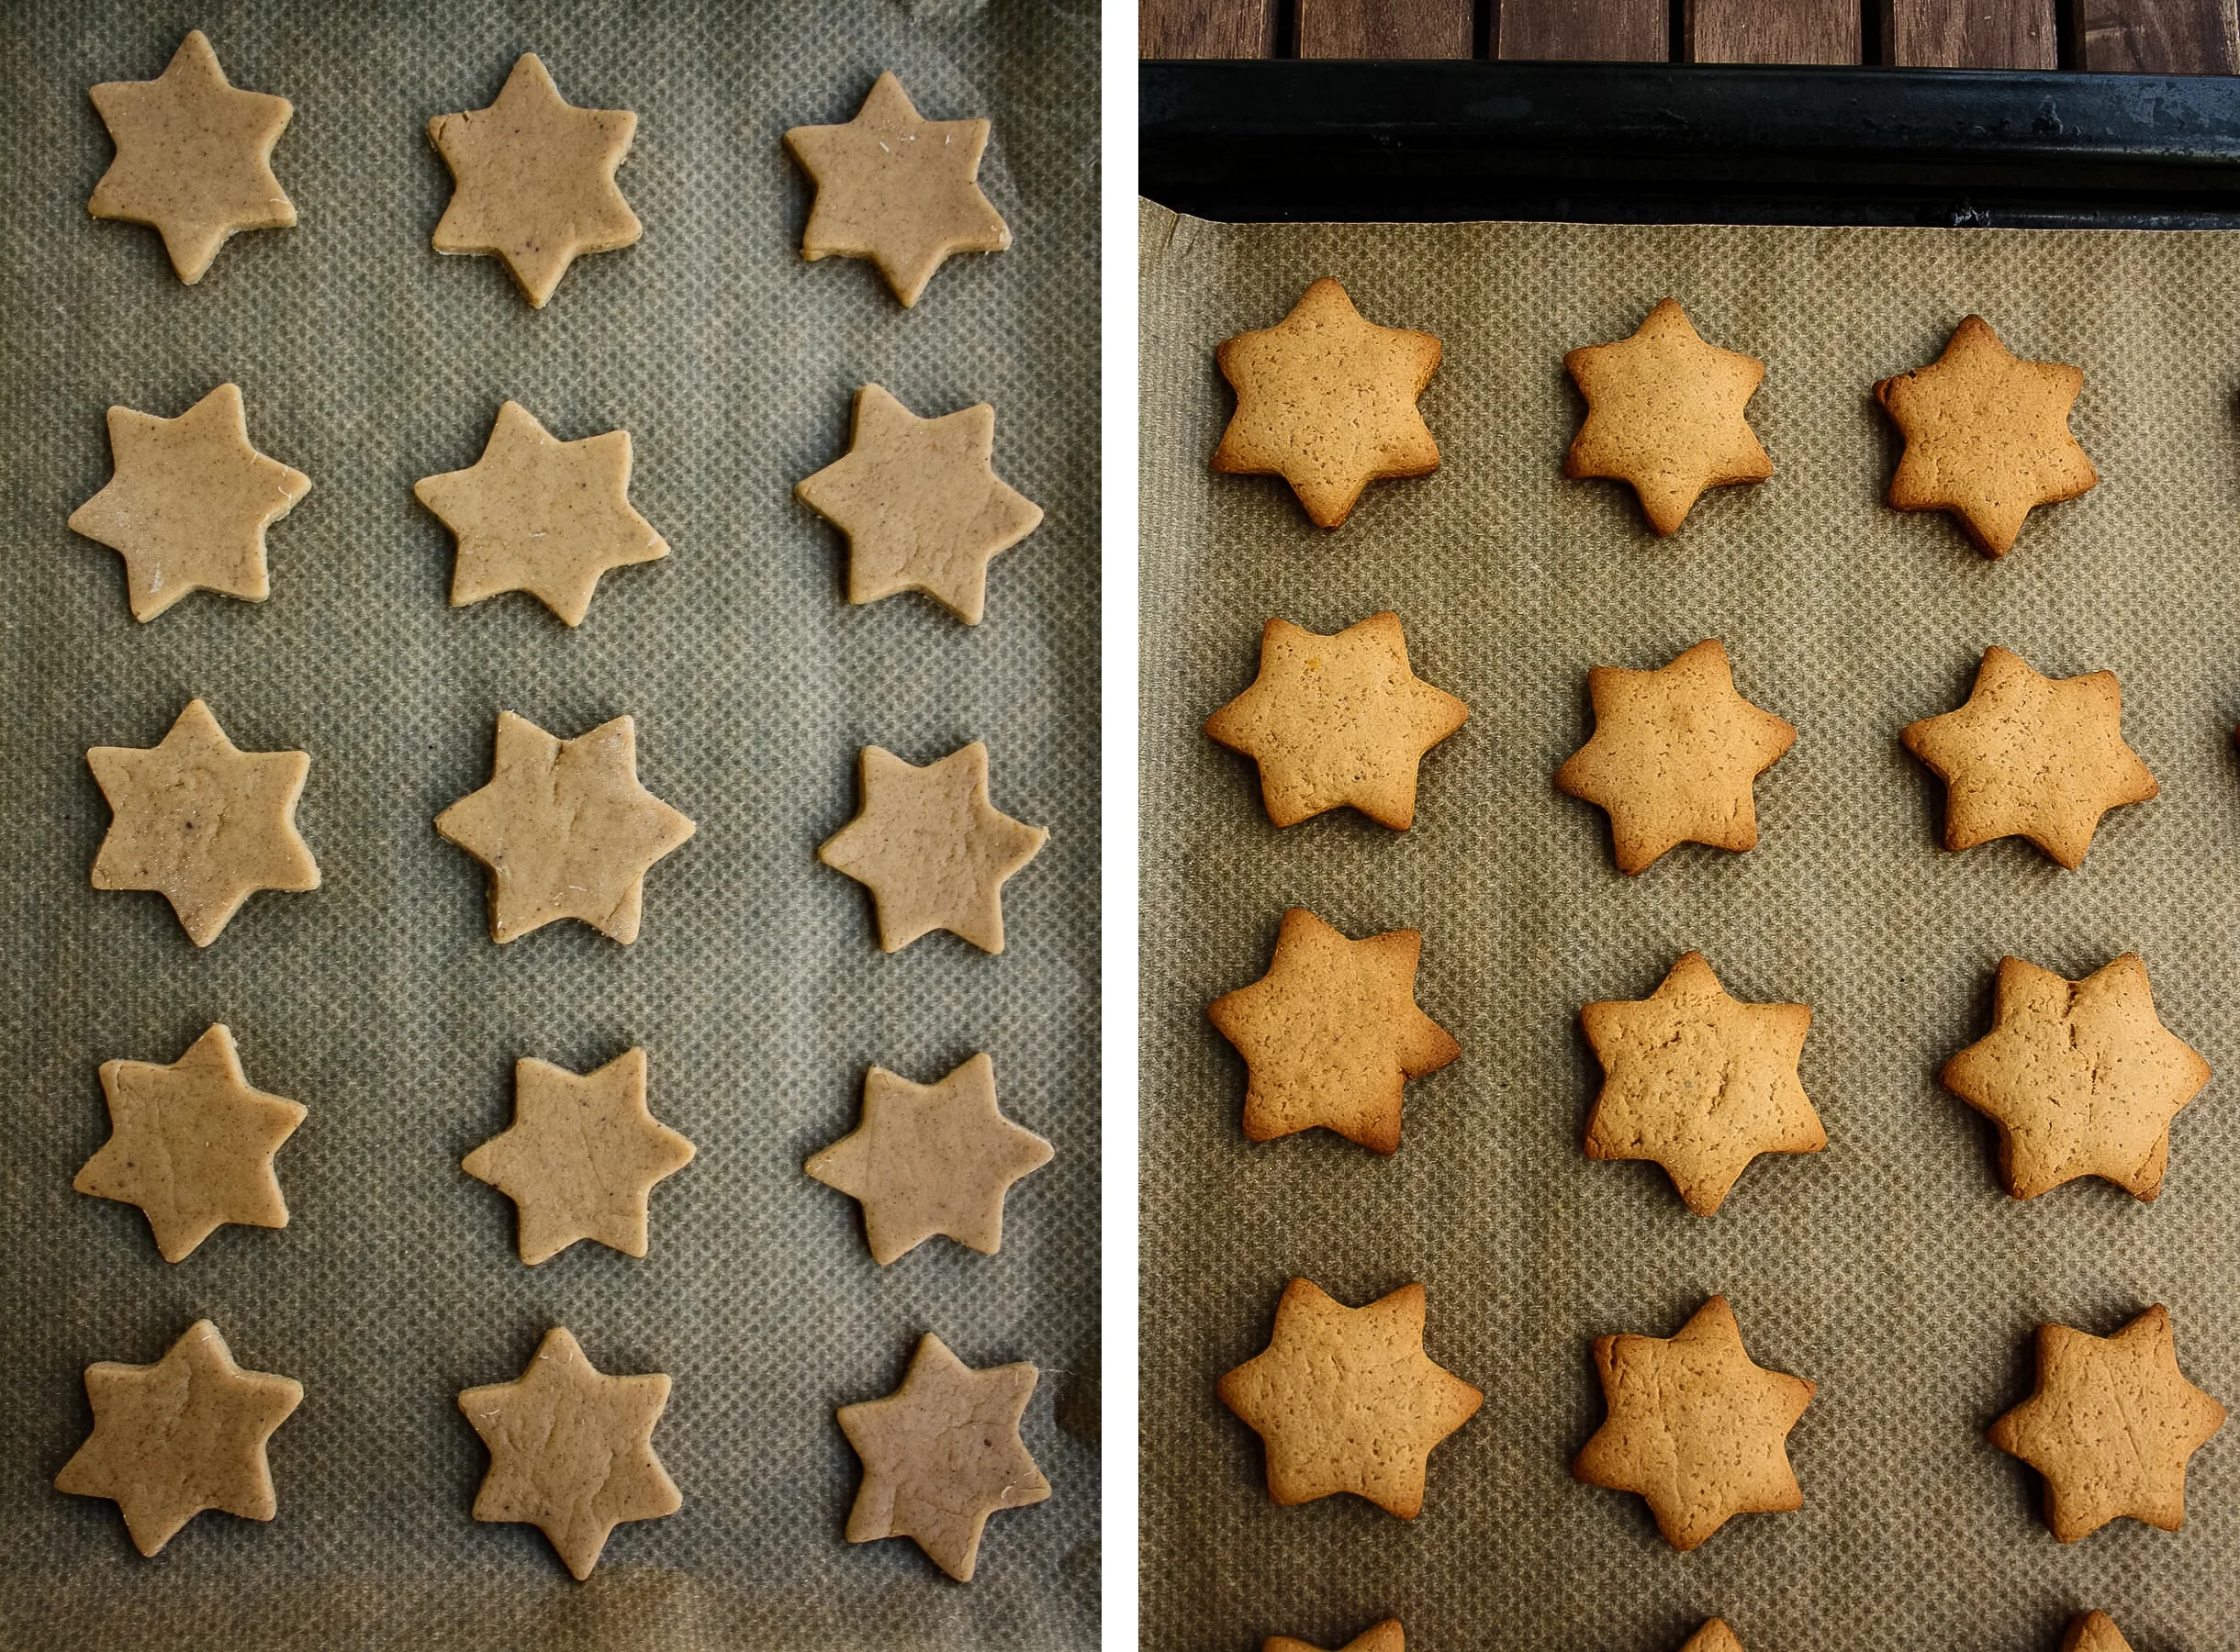 Unbaked and Baked Star-Shaped German Christmas Cookies.